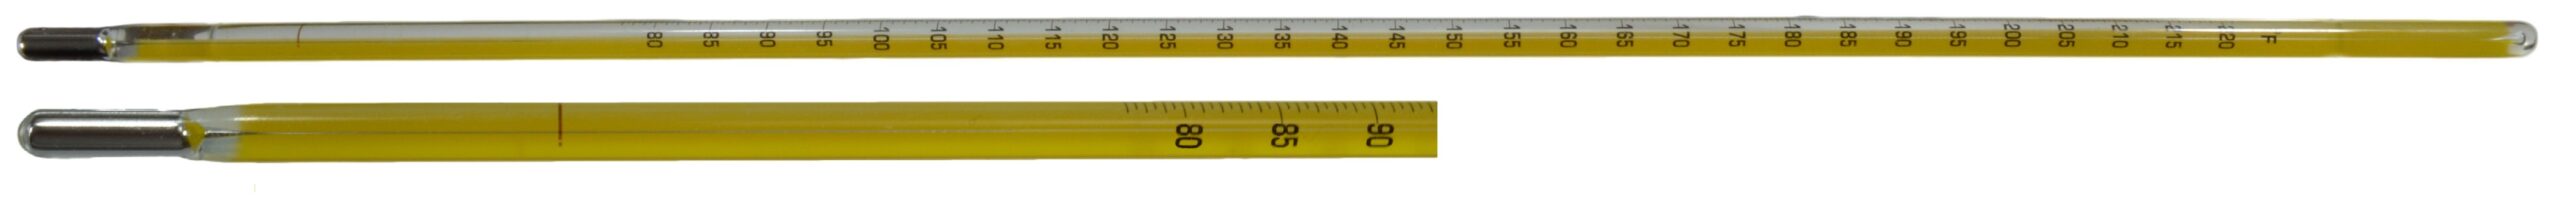 General Laboratory Thermometers